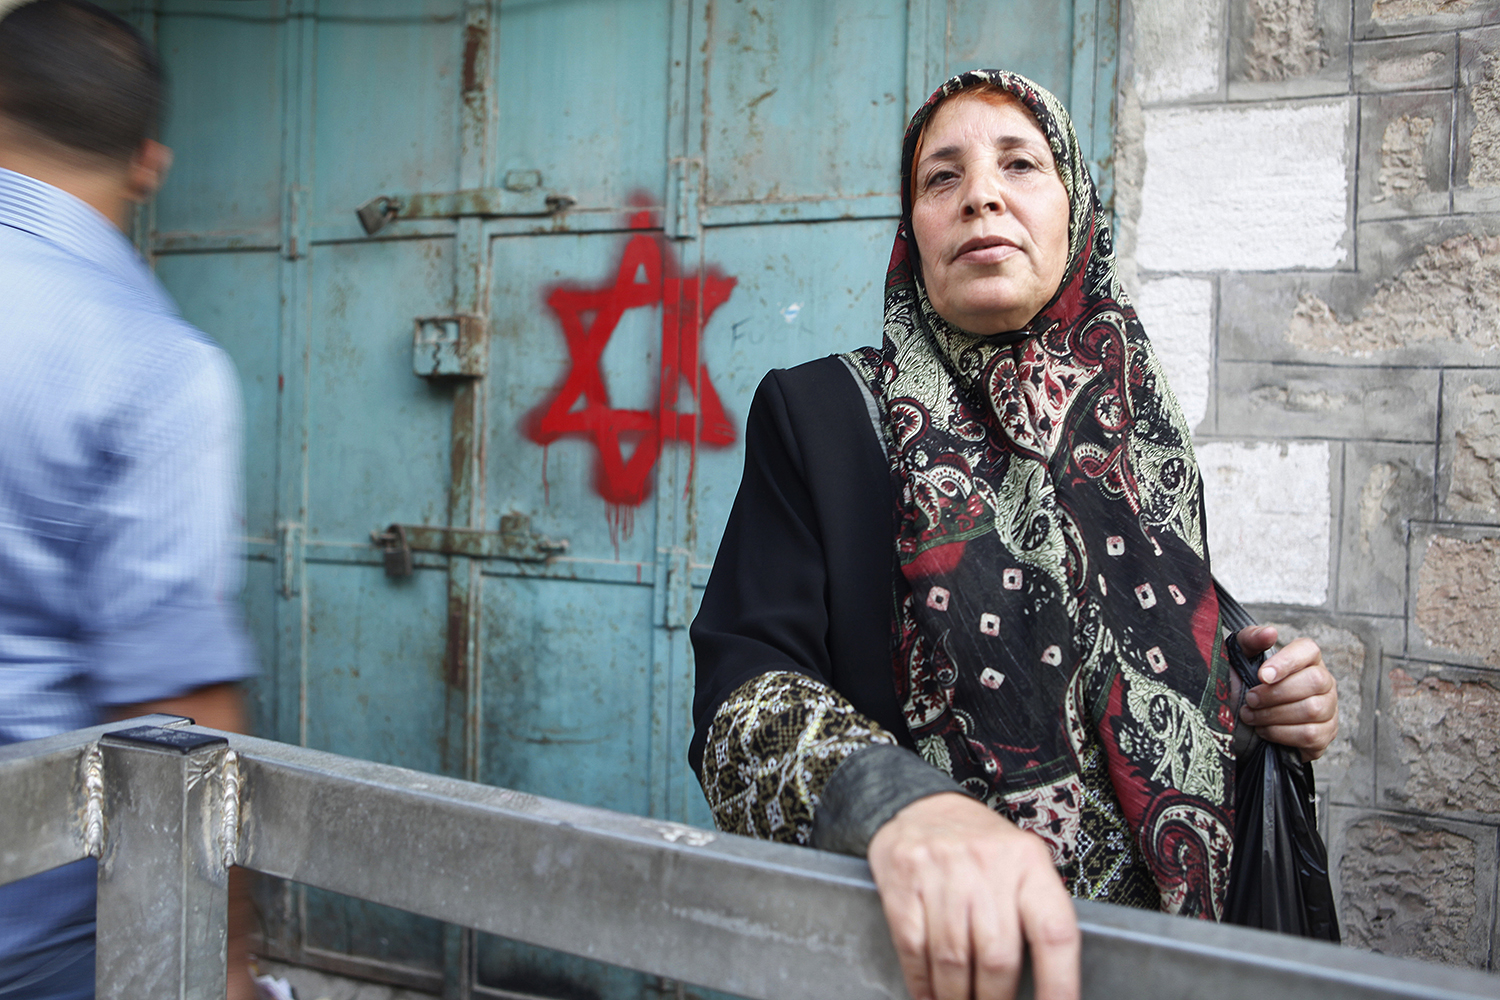 6 A Palastinian woman stands by a building in Herbron, which has been marked with the Jewish cross to sybolise Jewish ownership, West Bank .jpg